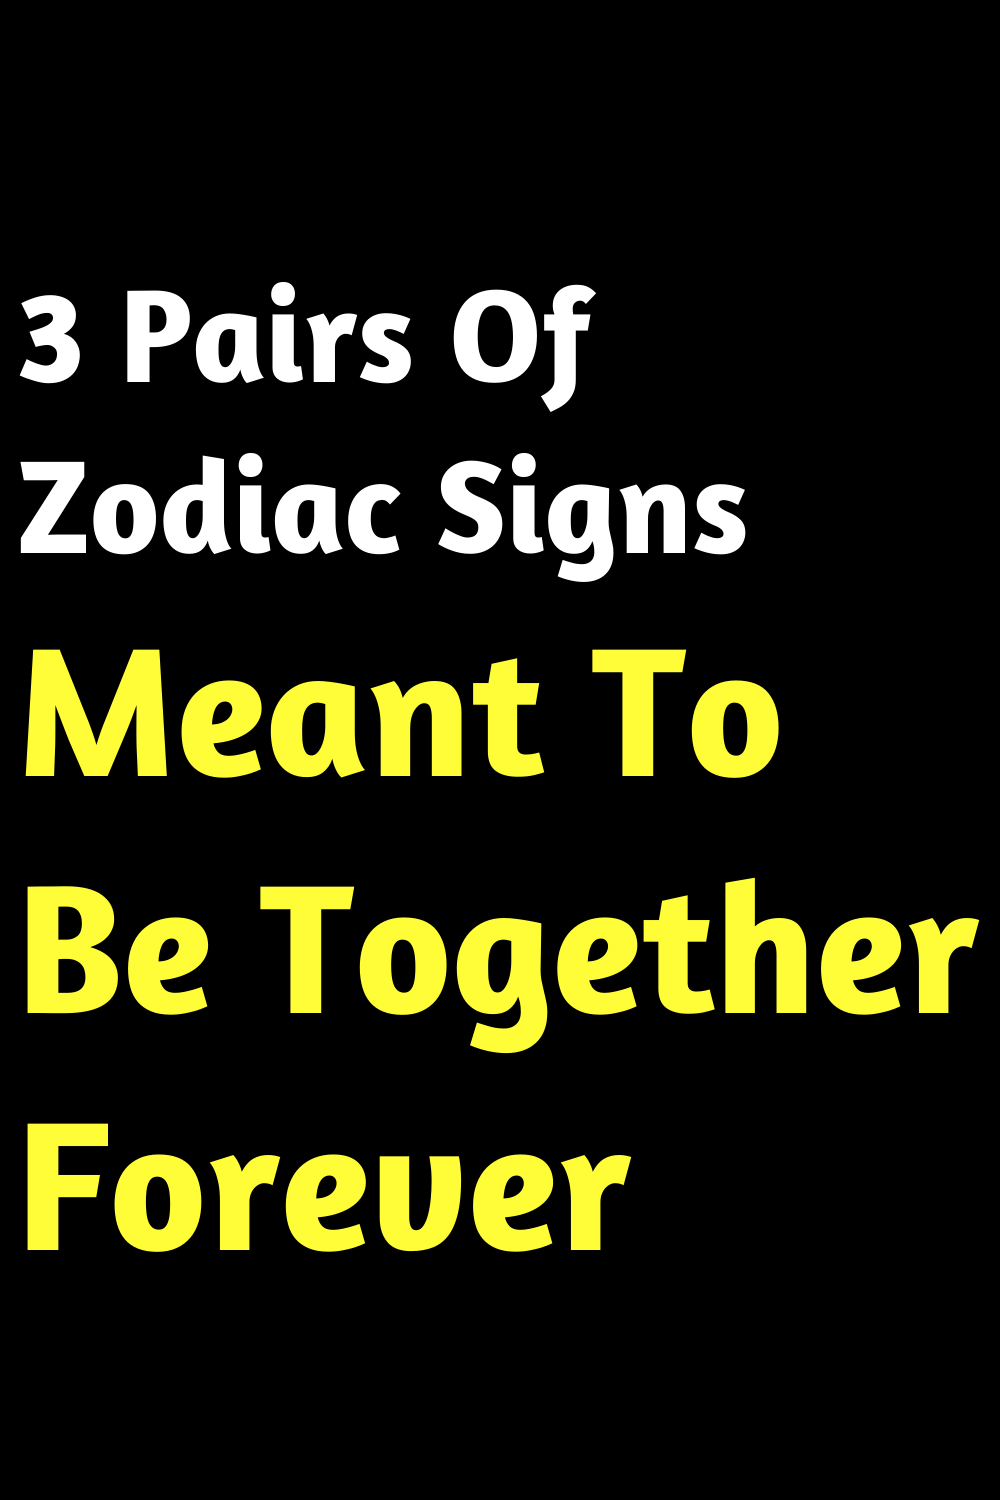 3 Pairs Of Zodiac Signs Meant To Be Together Forever